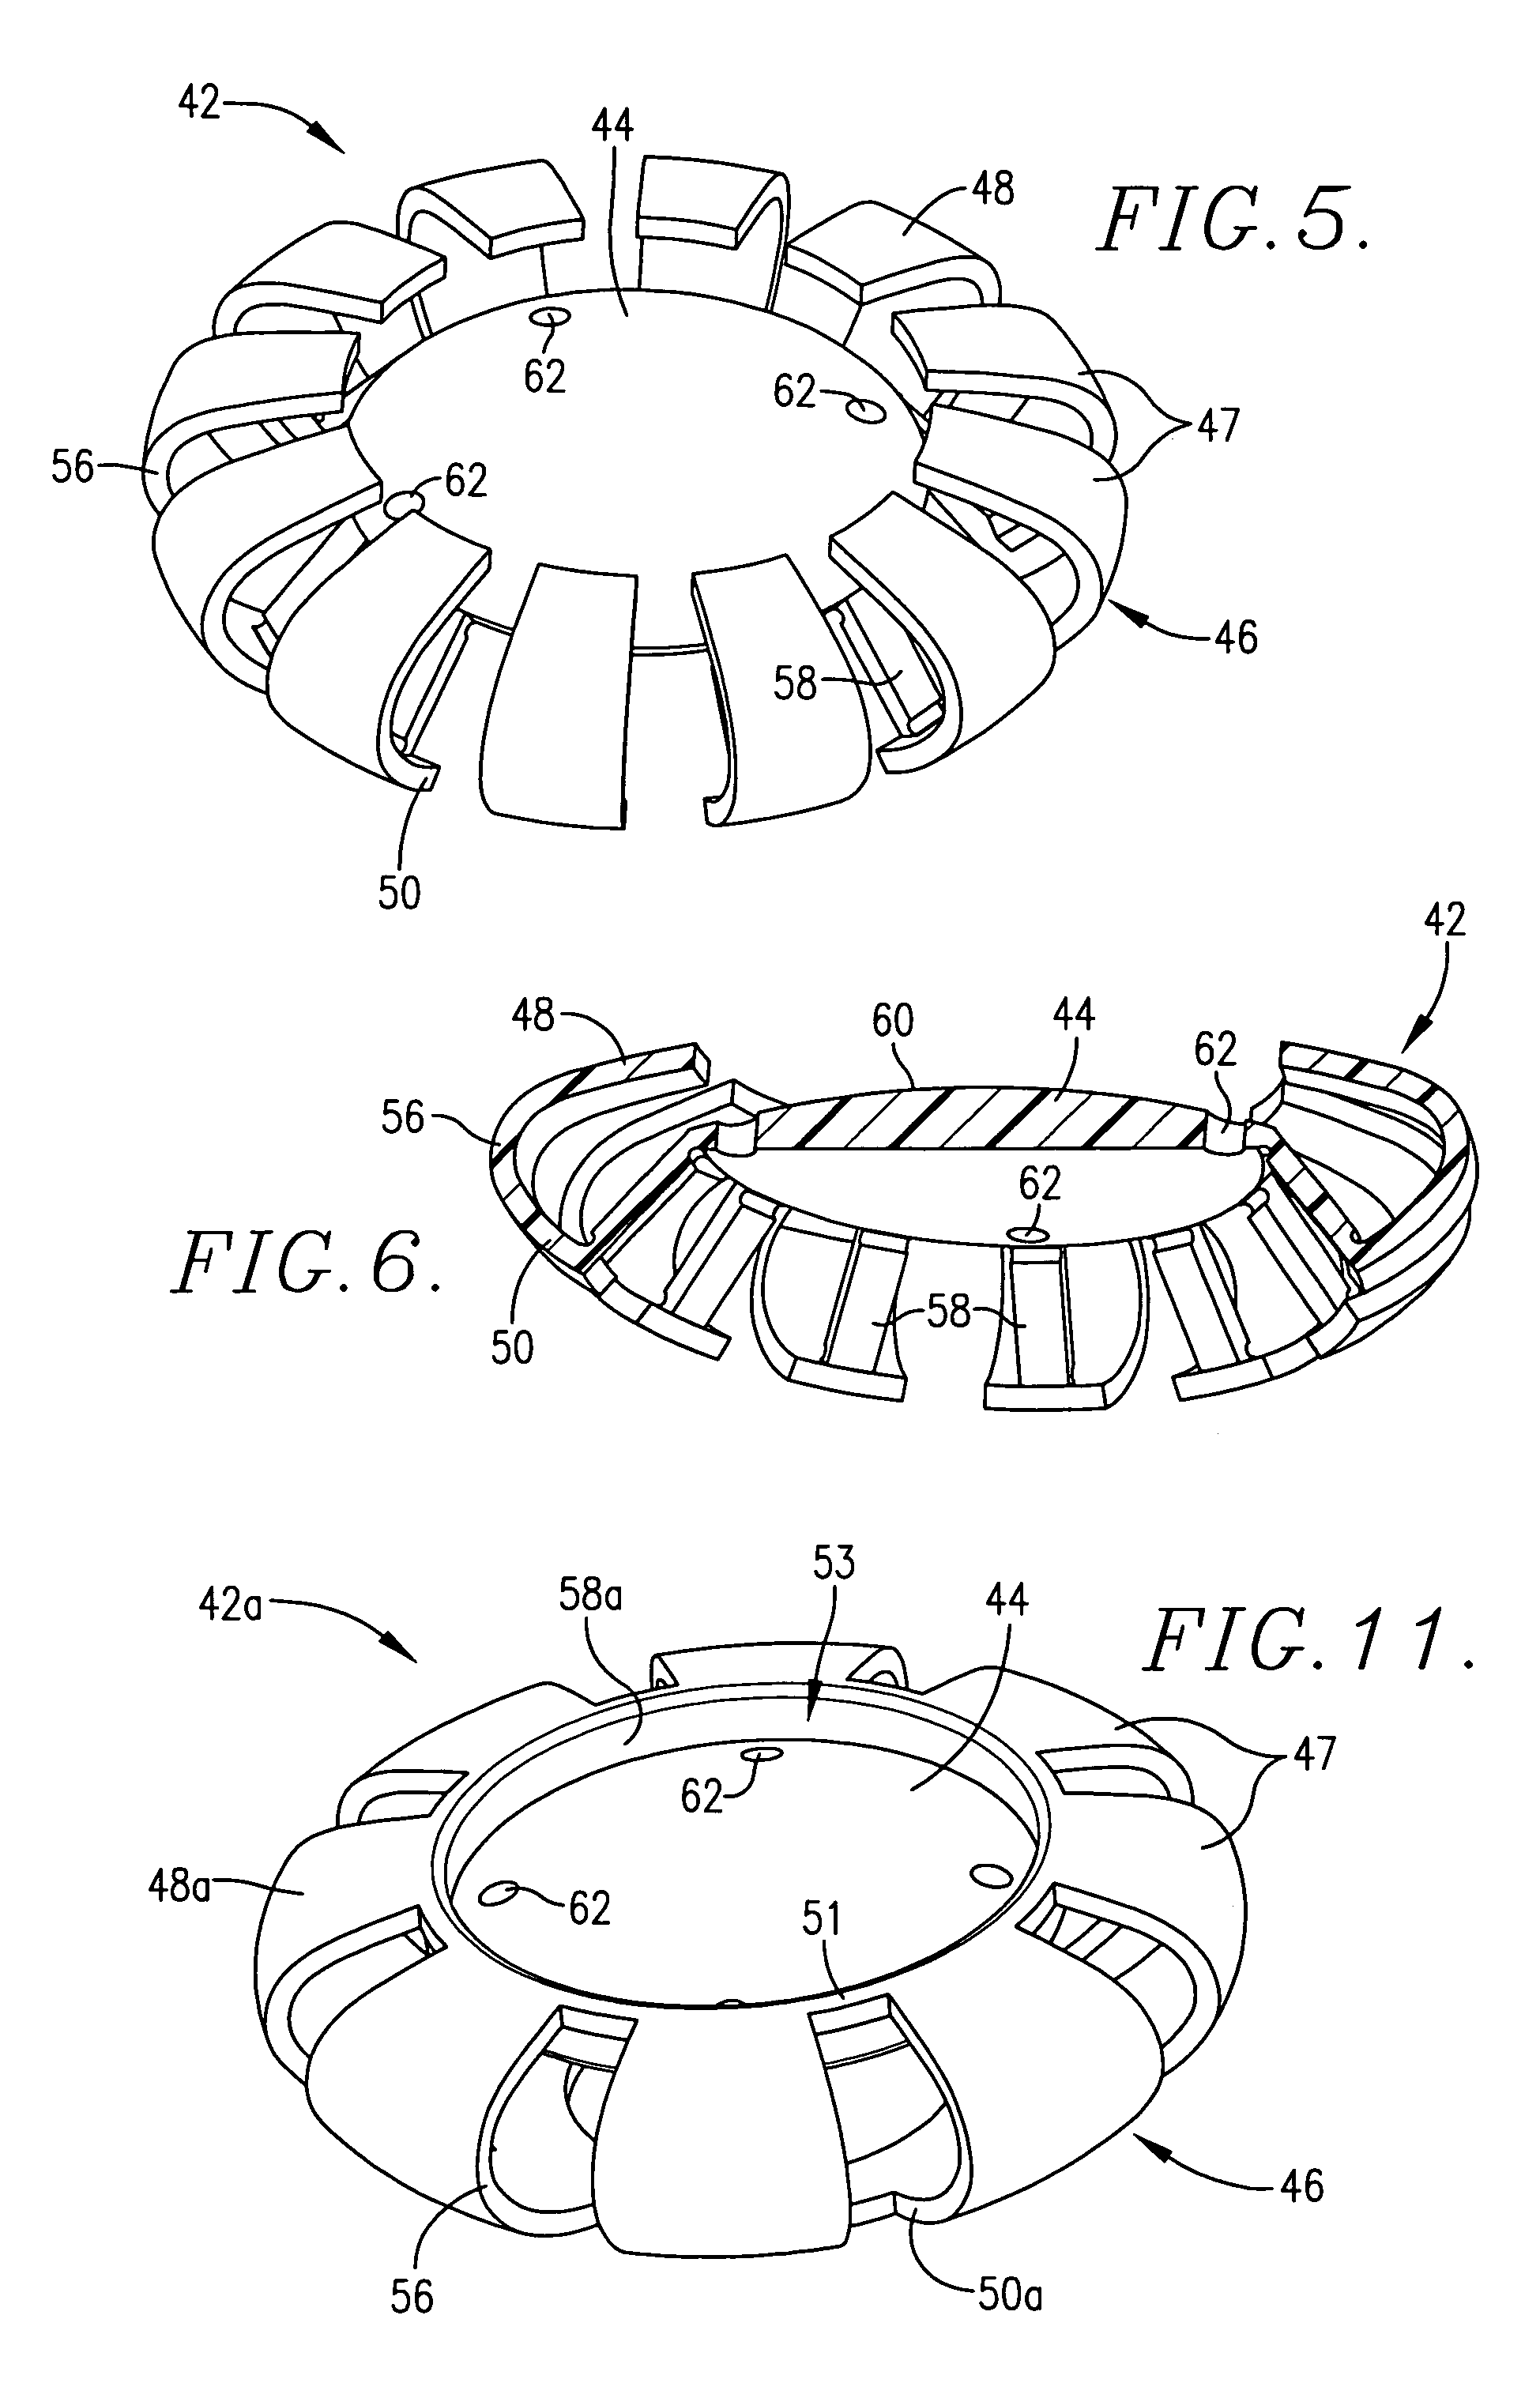 Accommodating intraocular lens implant